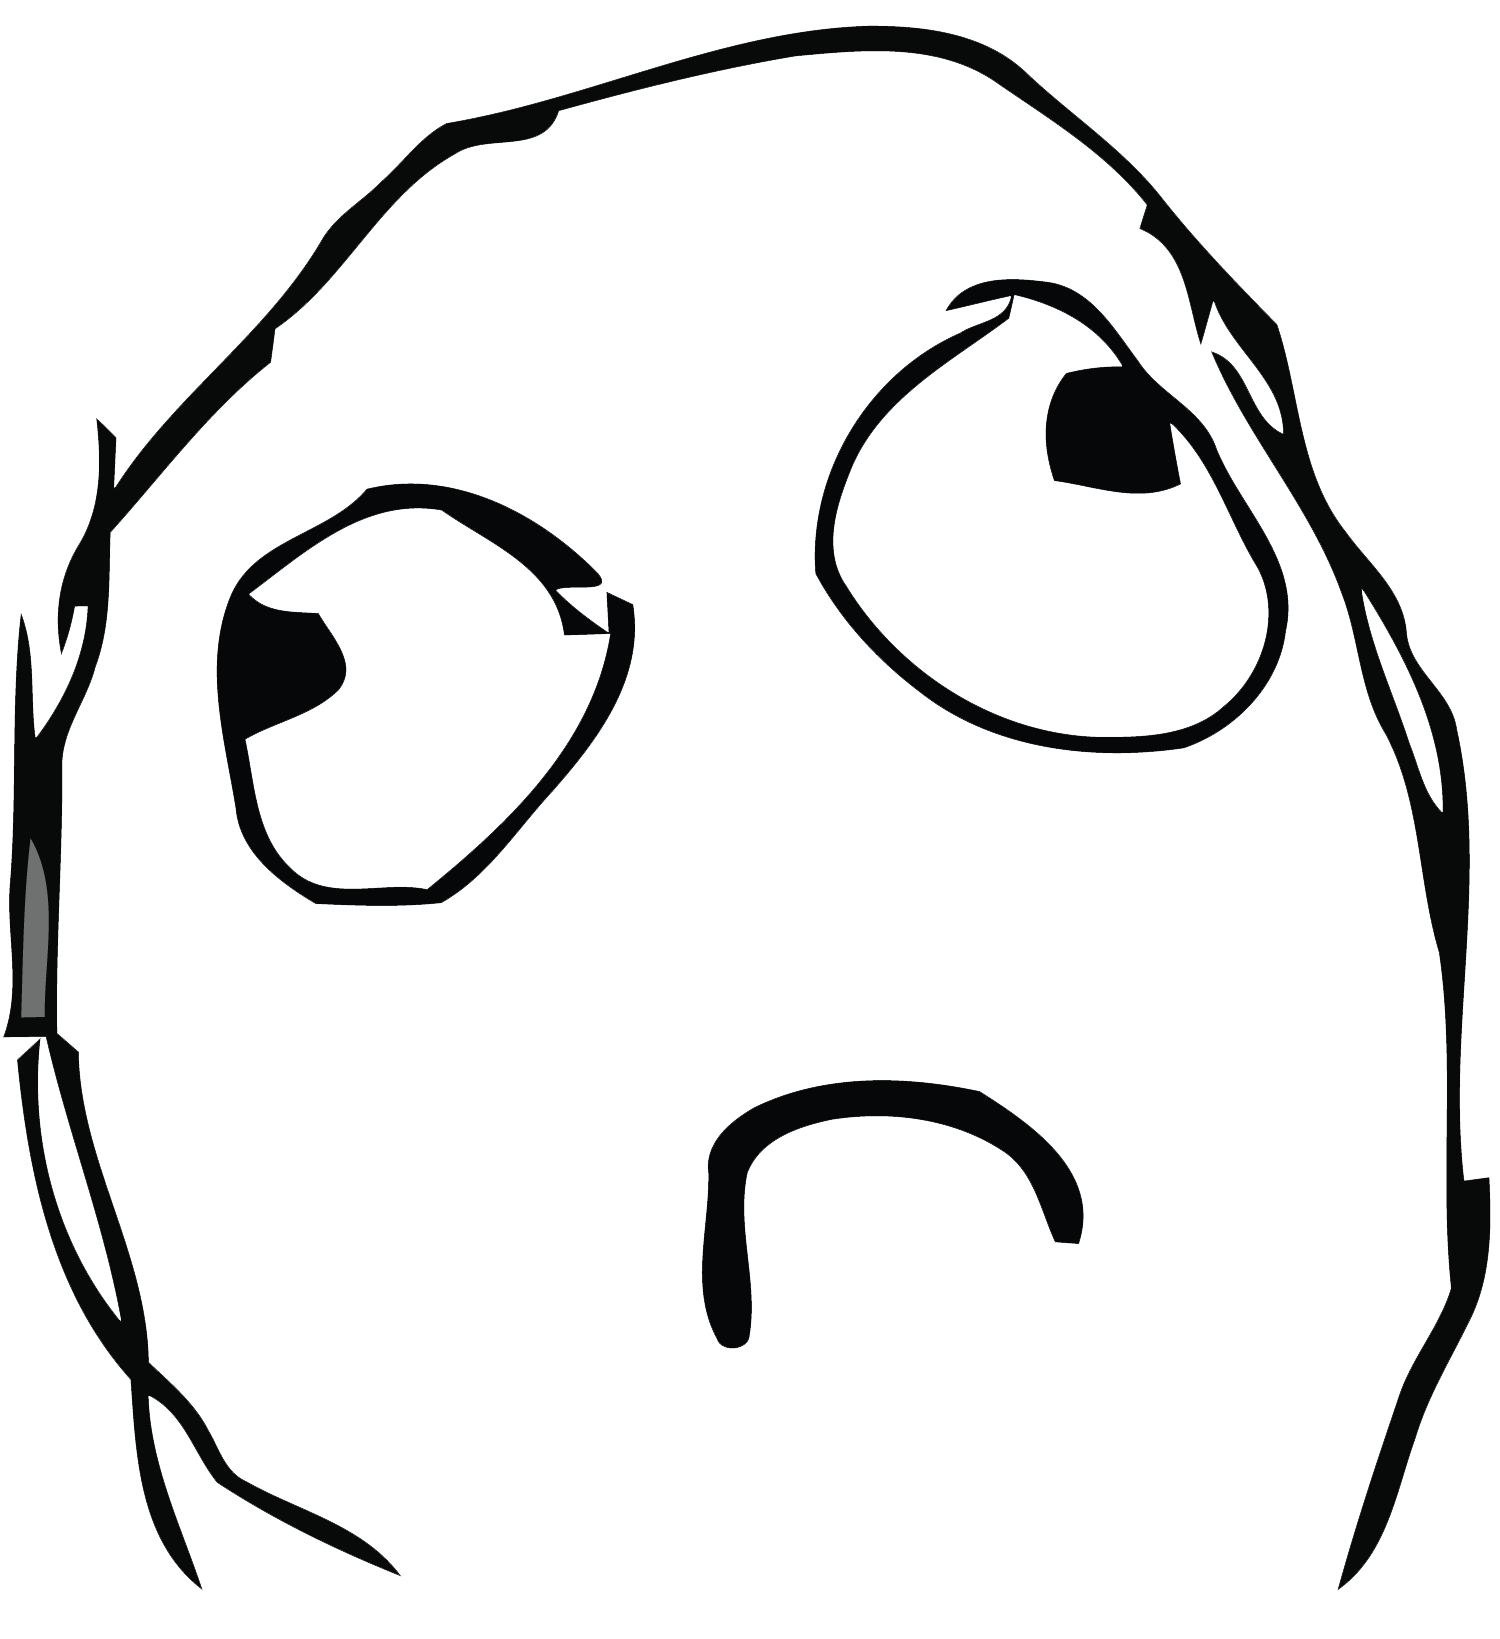 Rage Face Troll Face transparent PNG - StickPNG